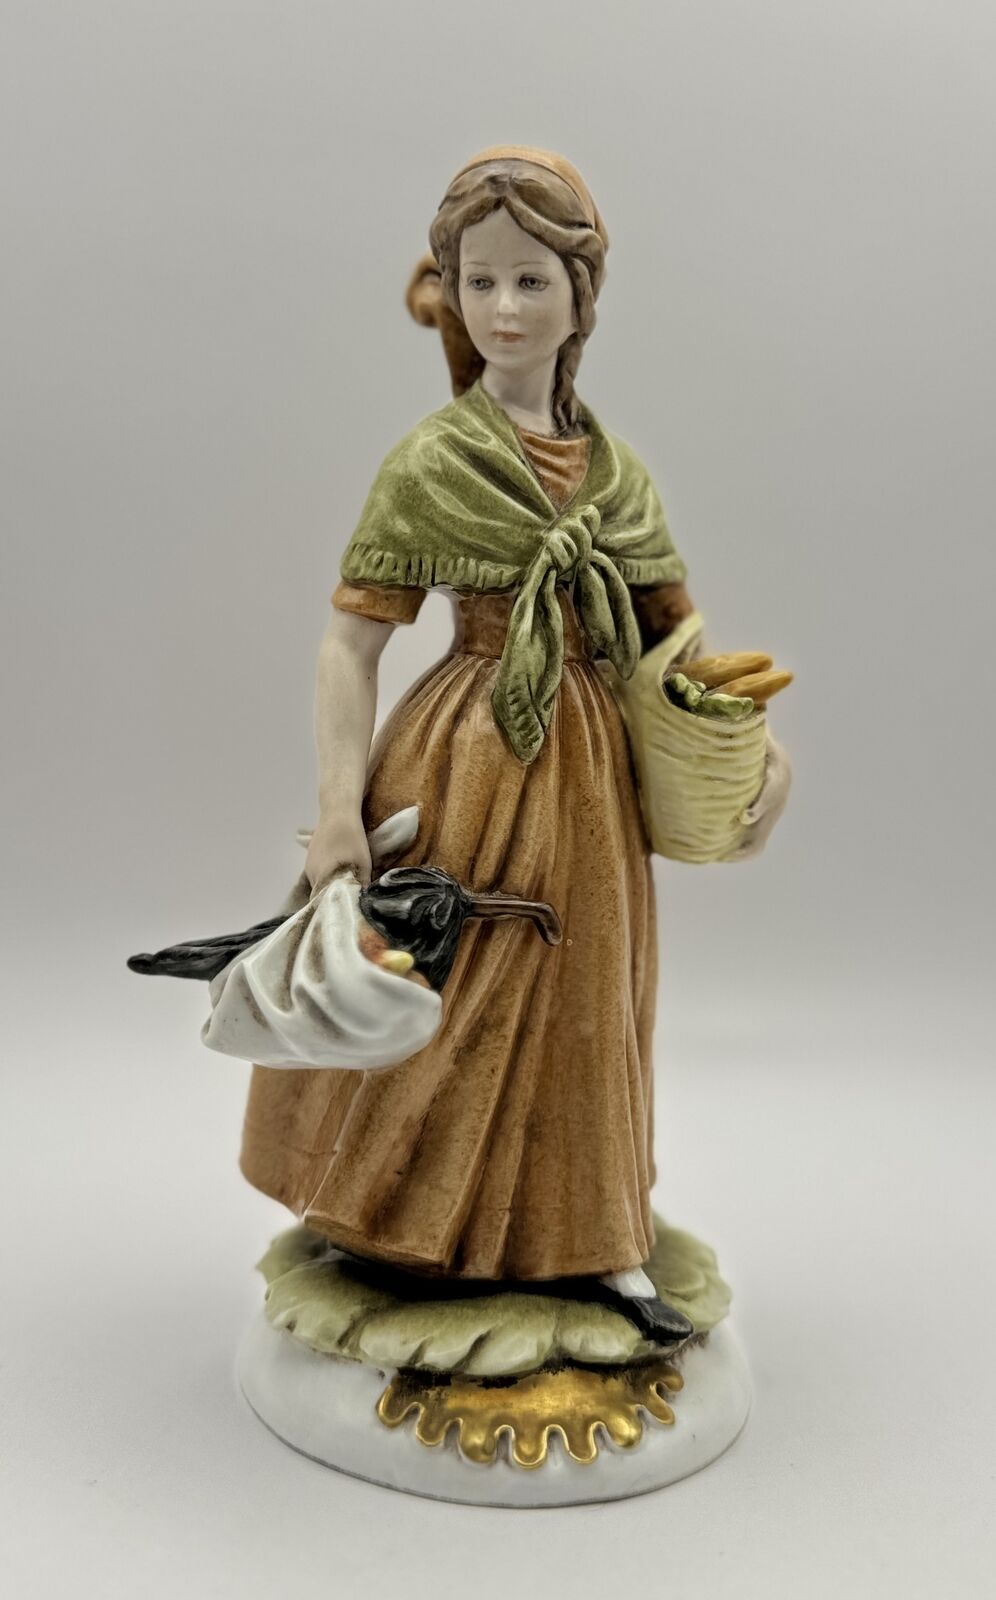 Capodimonte Porcelain Figurine of a Young Woman with Basket and Duck